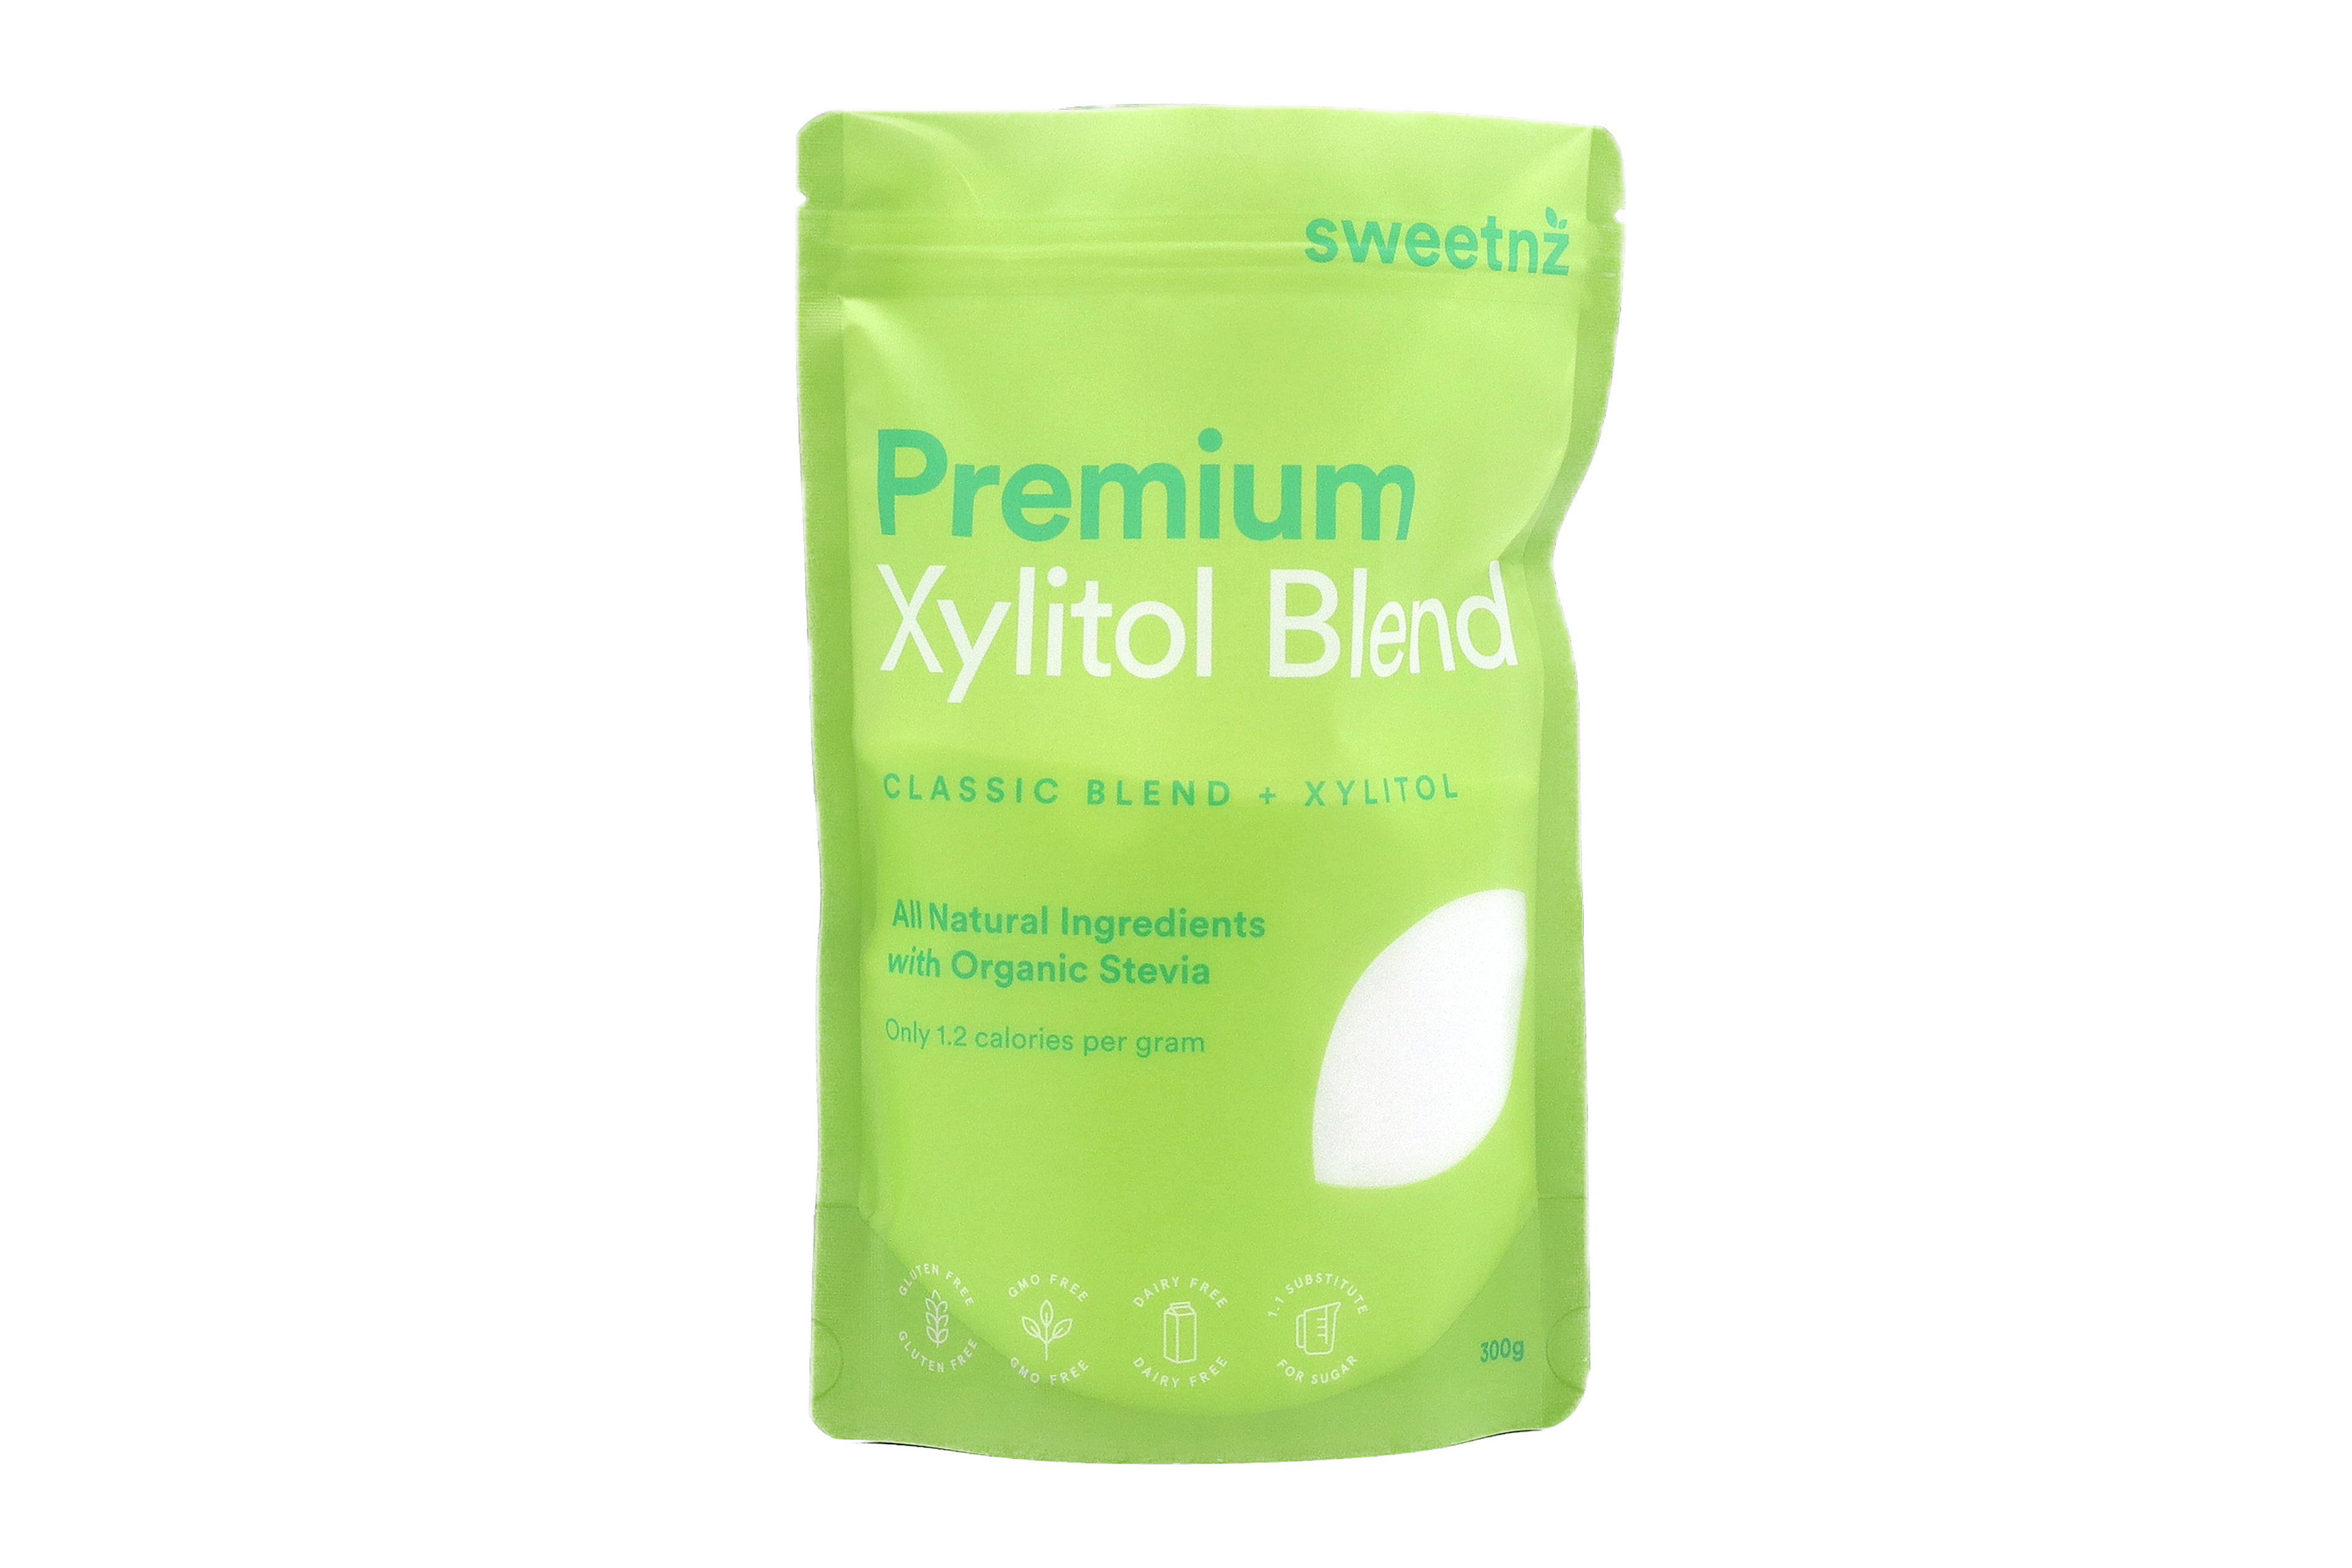 300g Premium Xylitol Blend - made by blending Classic Not Sugar and Xylitol.